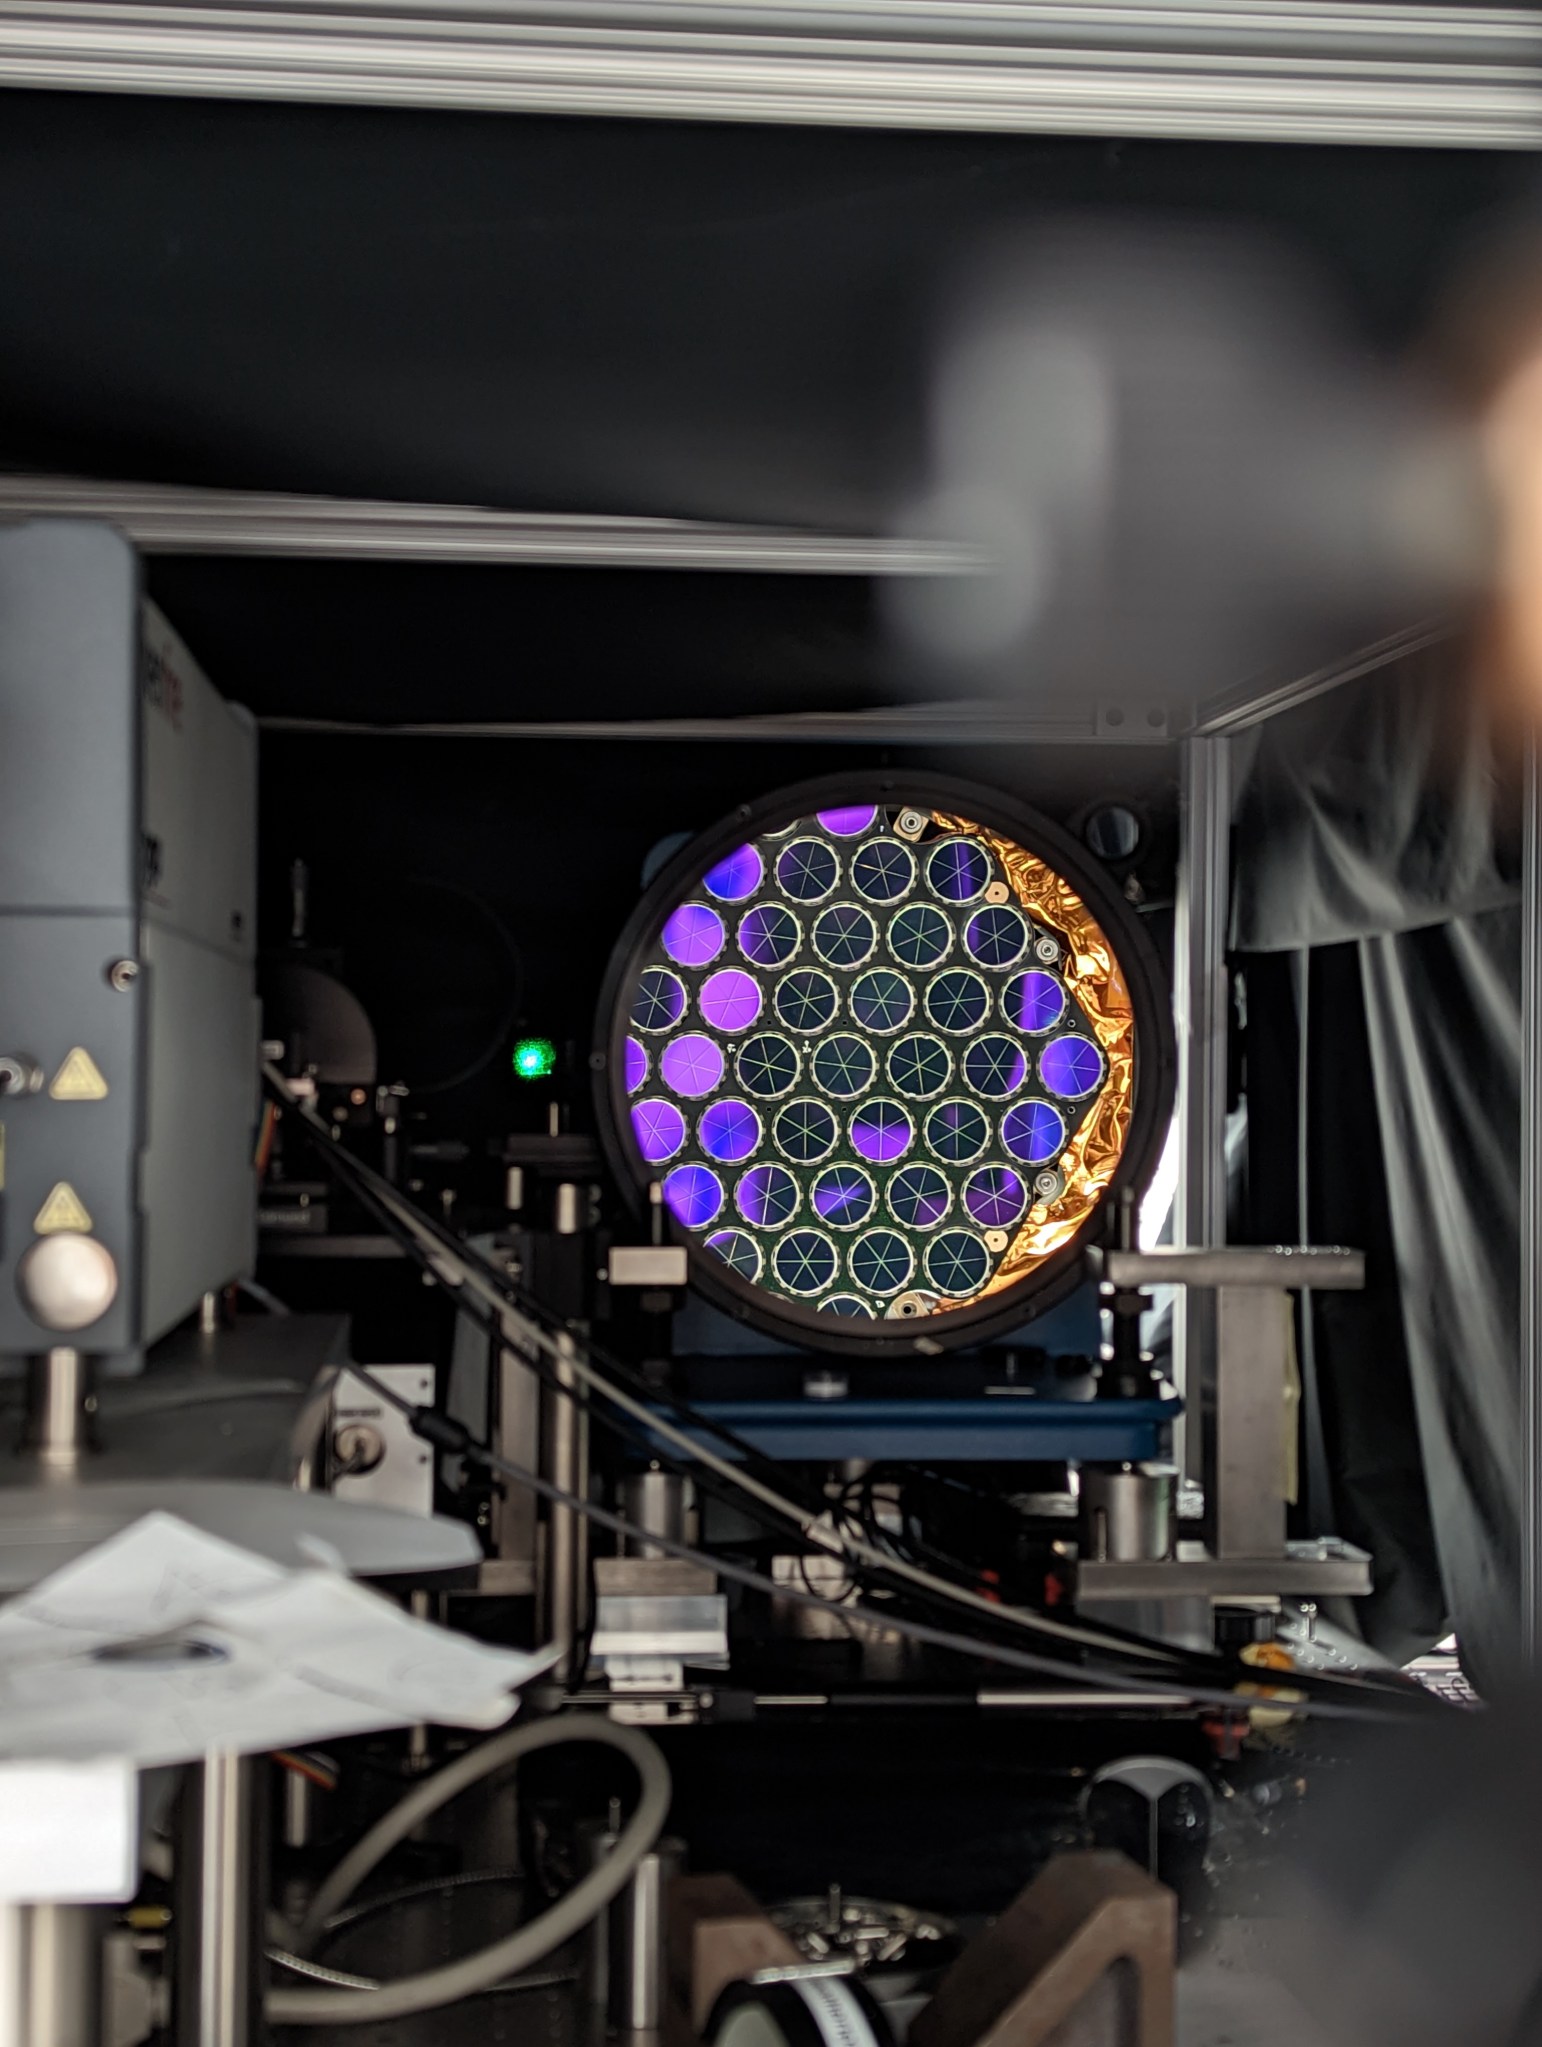 The focus of the image is a circular mirror. The reflection off of the mirror is the laser retroreflector array, which is made up of multiple smaller circular shaped mirrors together in a honeycomb pattern. They are reflecting black and purple colors of the arrays surroundings. At the right edge of the main reflection there is some copper colored foil also being reflected back towards the camera. Surrounding the large mirror is parts of the test apparatus and a darkly lit room.